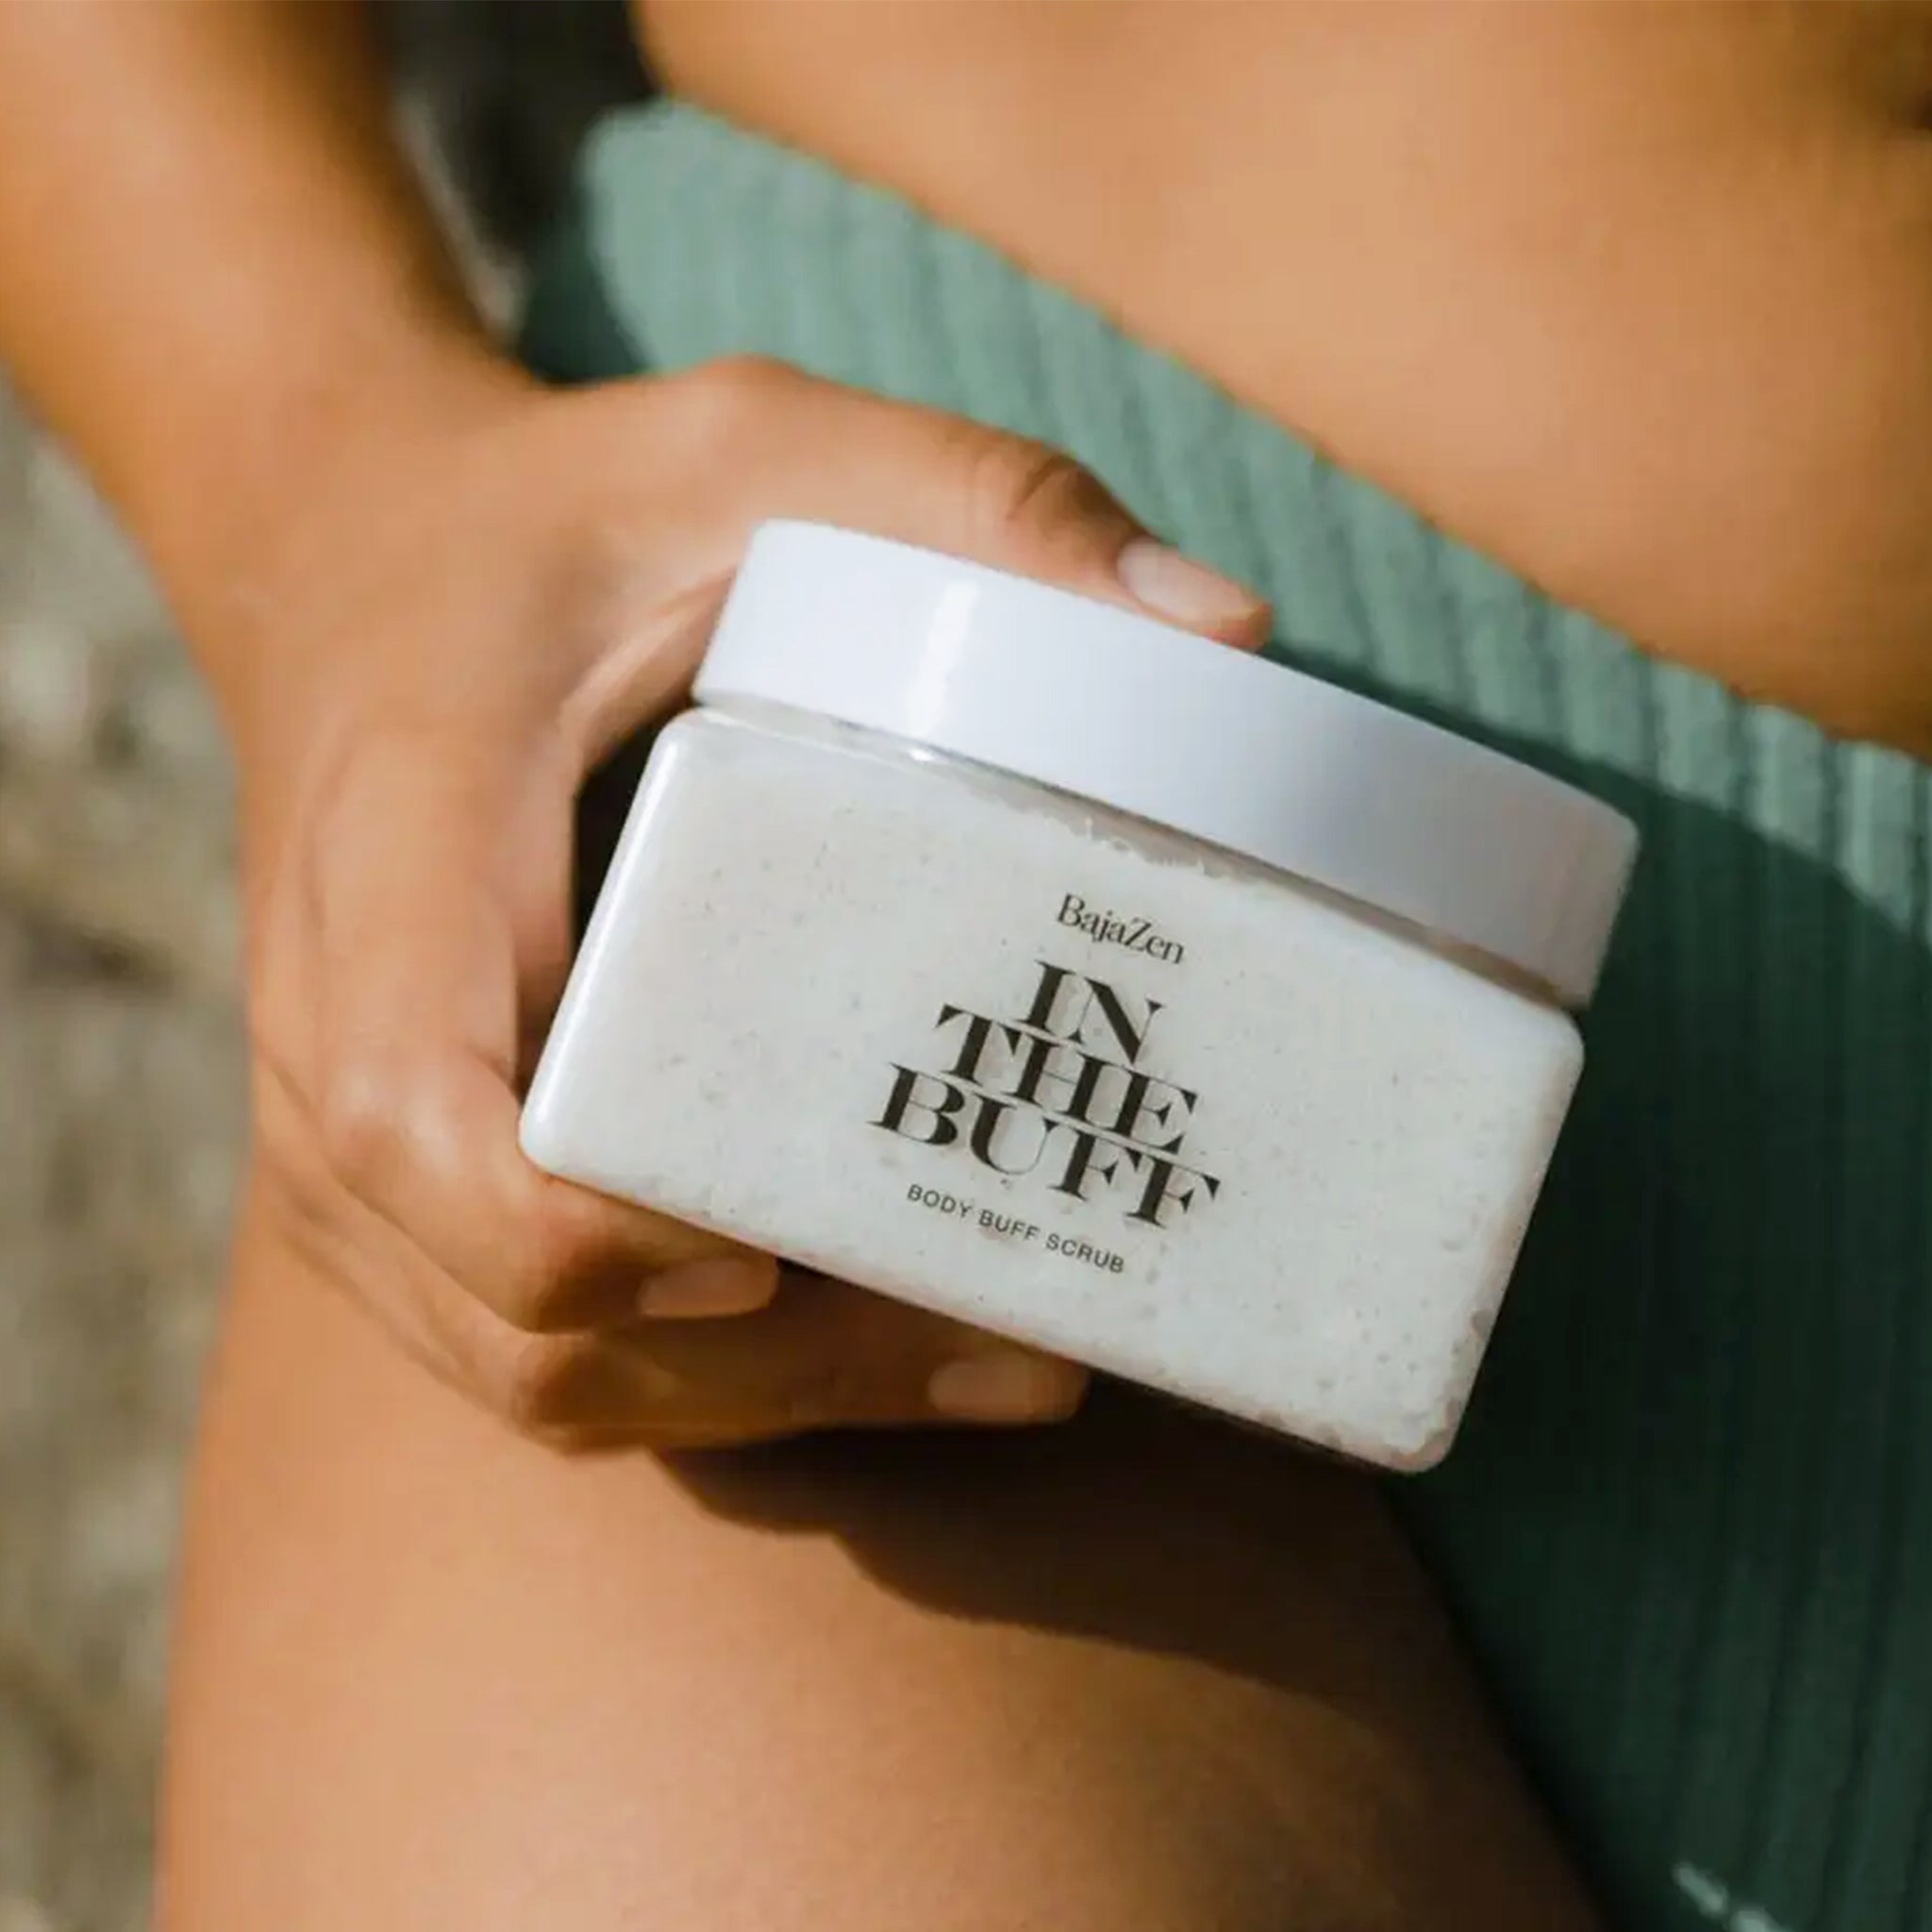 A clear container filled with a white body scrub with a white lid and black text that reads, "In The Buff Body Buff Scrub".